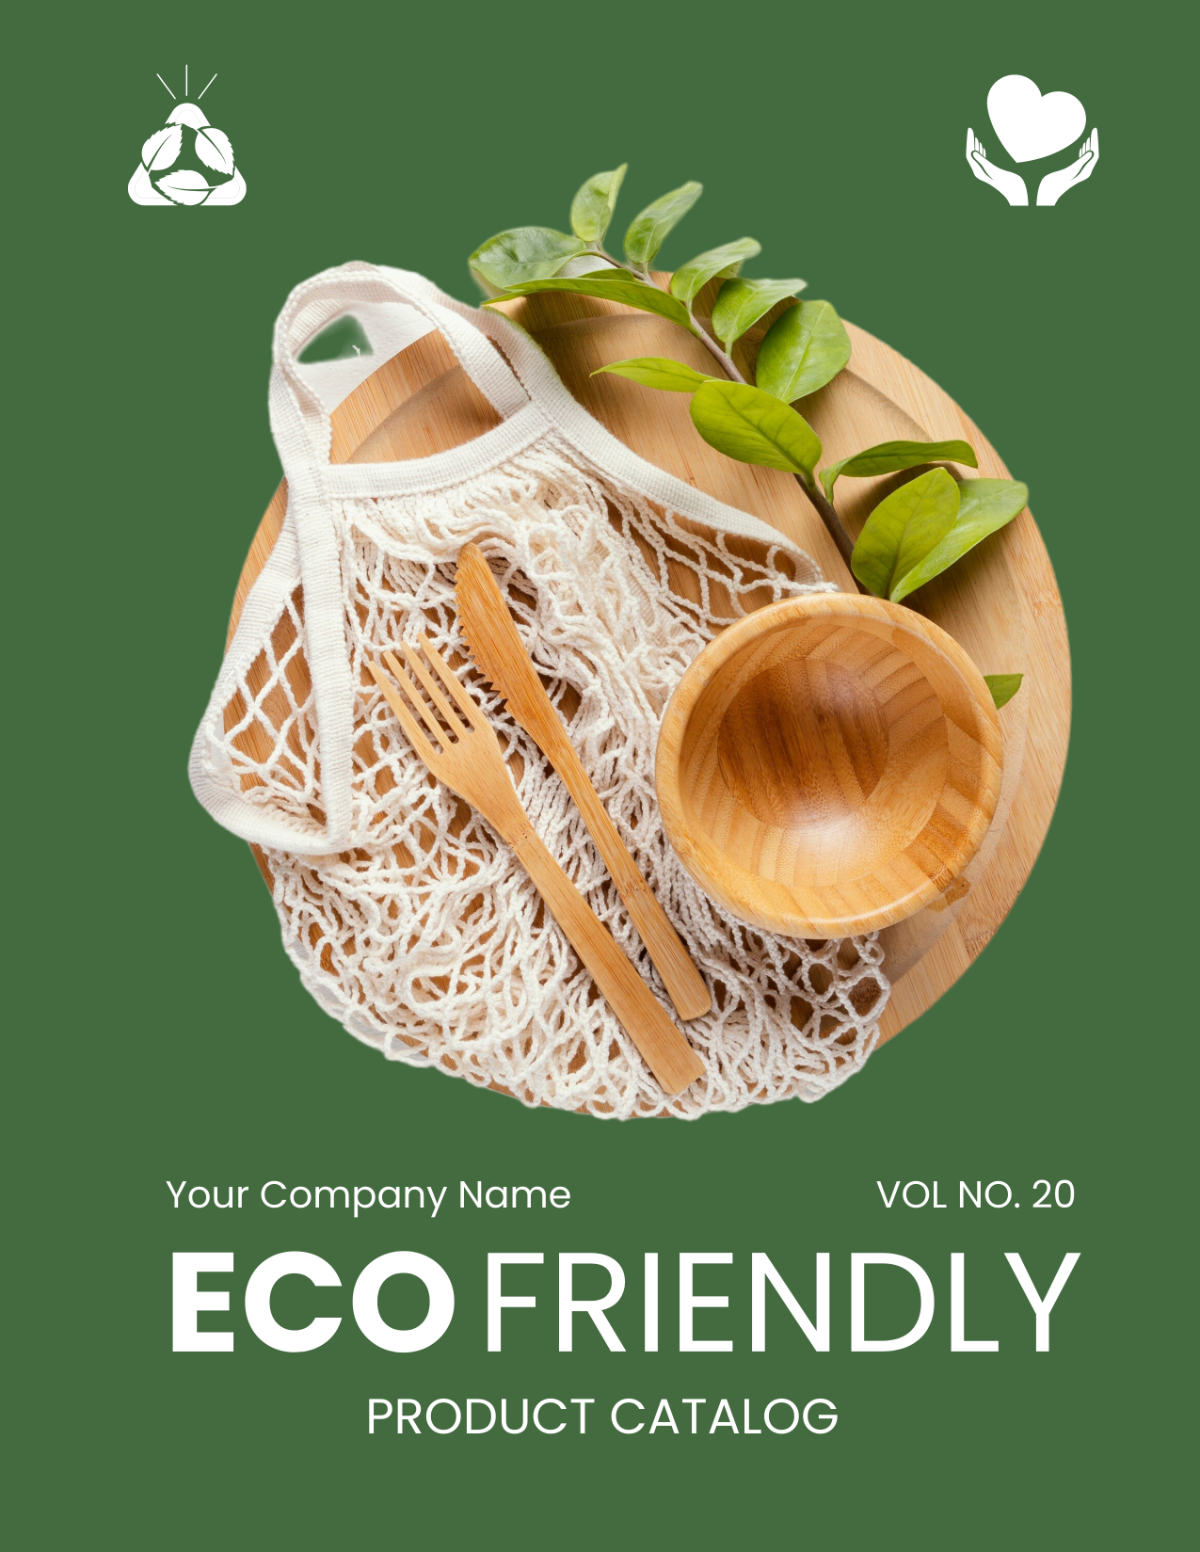 Eco Friendly Products Catalog